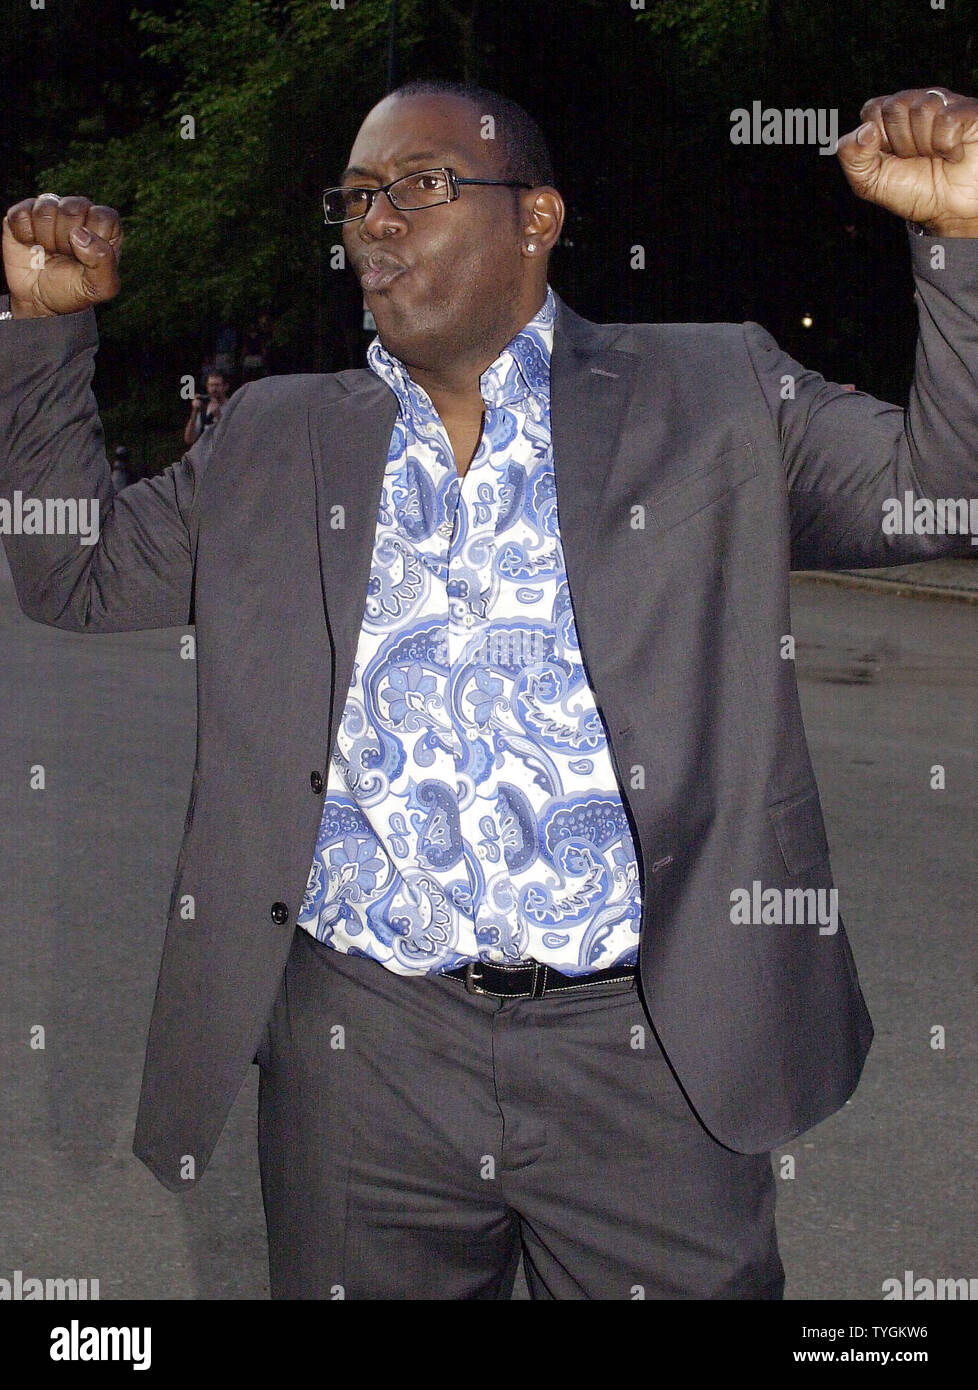 American Idol judge Randy Jackson celebrates his 117 pound weight loss while posing at the June 3, 2004 ceremonies for the Fresh Air Fund Salute to American Heroes honoring actress Natalie Portman. (UPI Photos/Ezio Petersen) Stock Photo